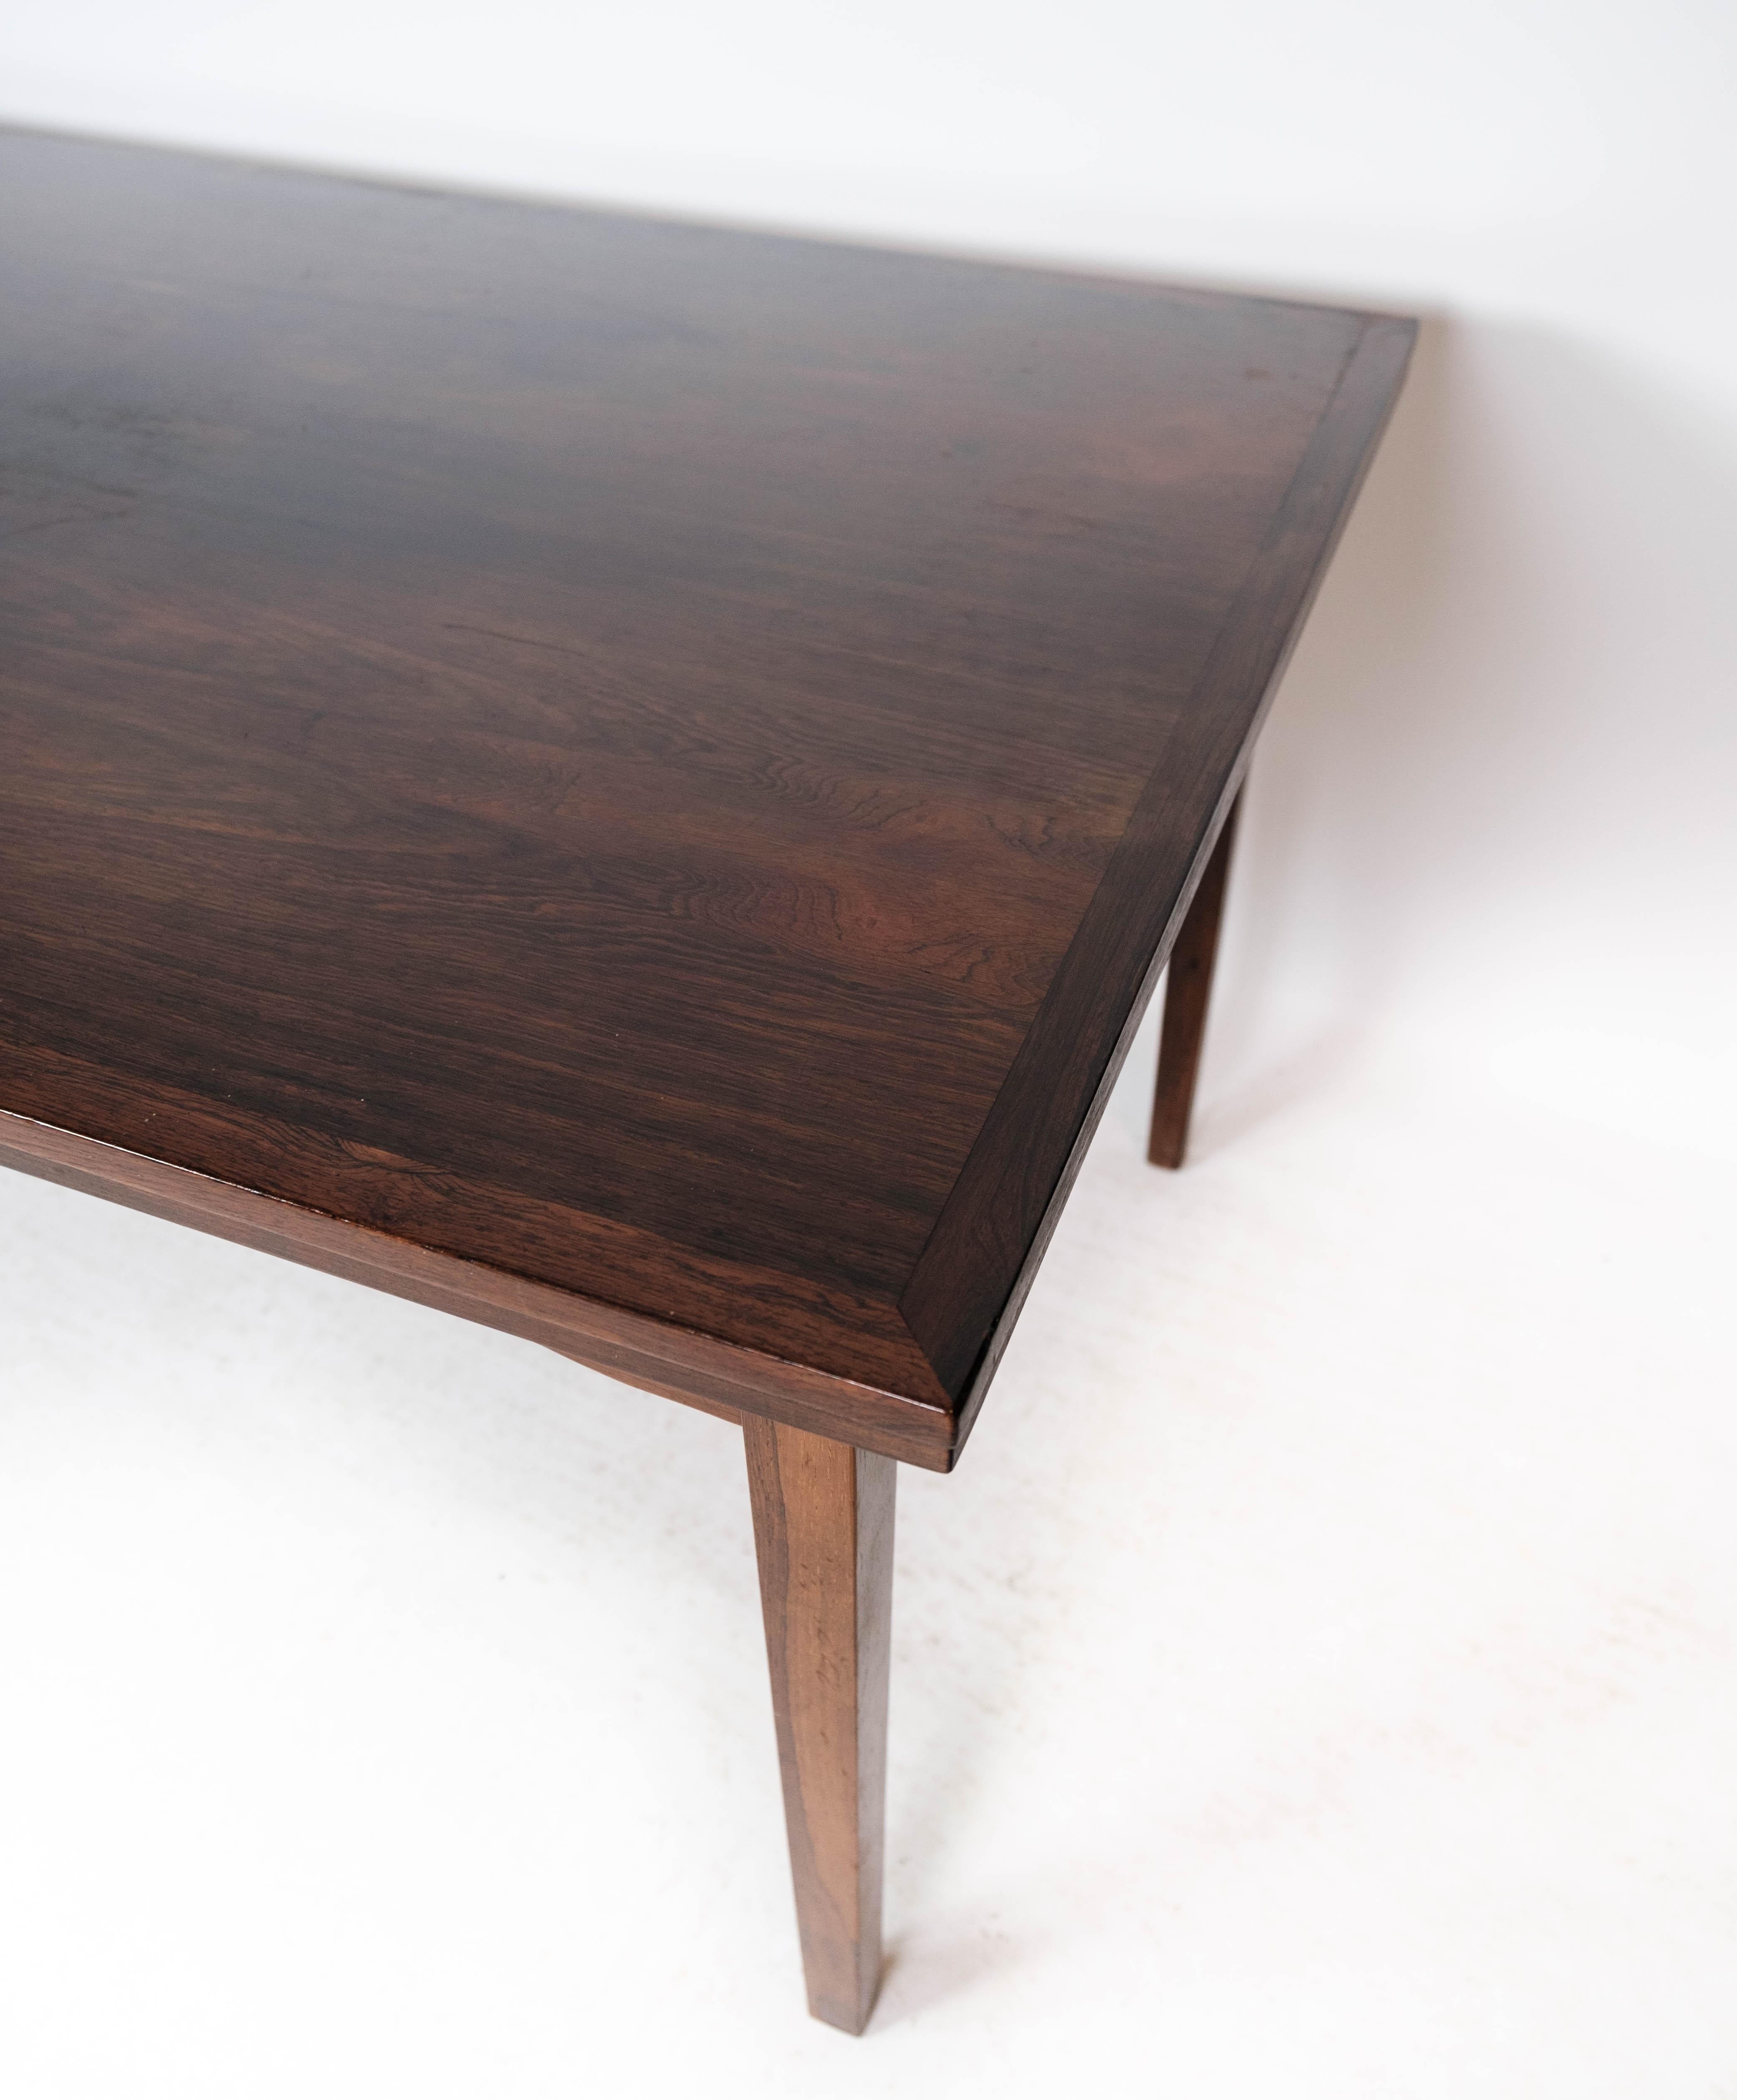 Dining Table in Rosewood with Extension, of Danish Design by Ellegaard, 1960s For Sale 3